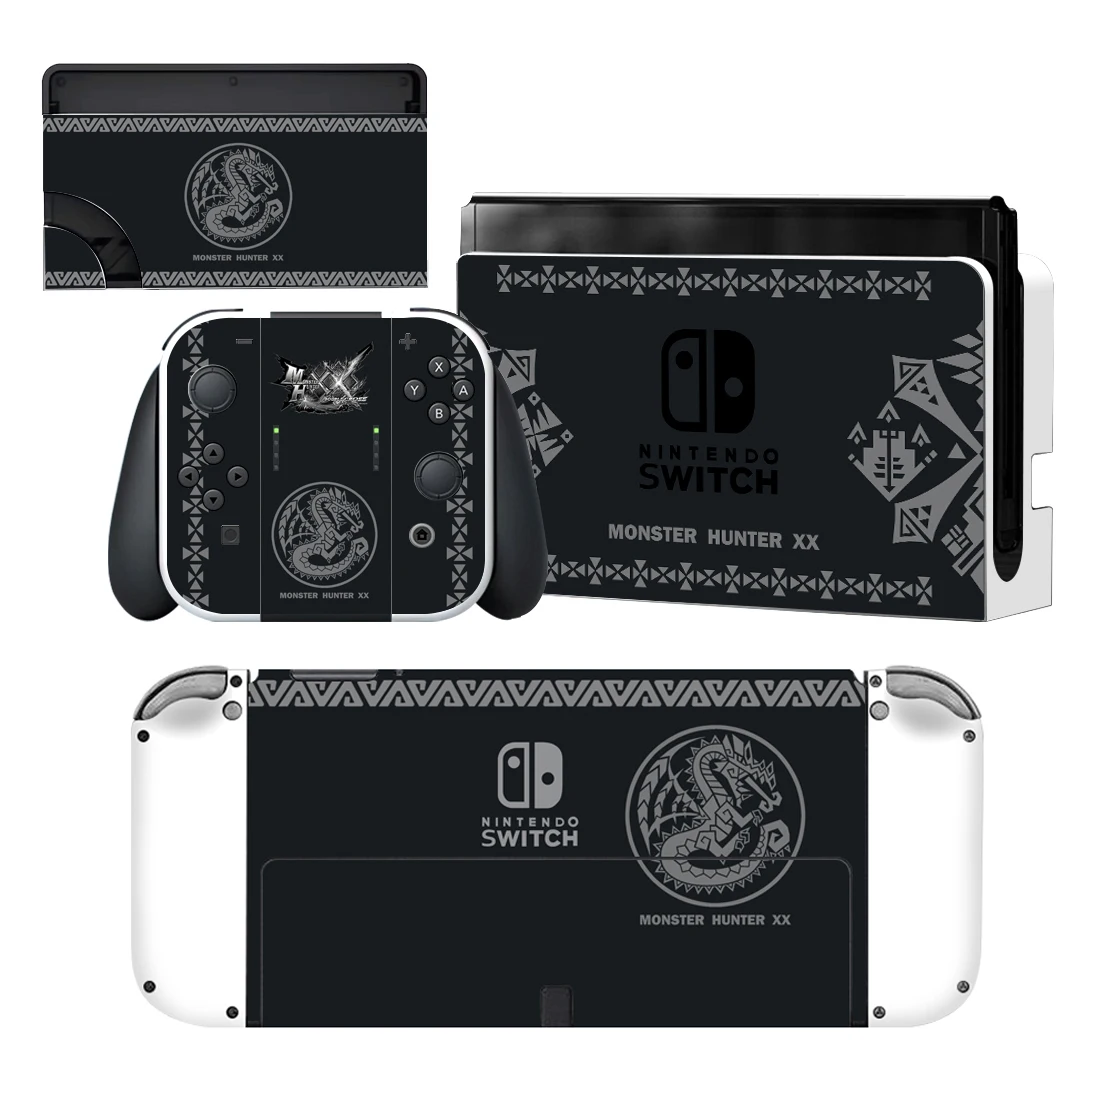 

Monster Hunter XX Nintendoswitch Skin Cover Sticker Decal for Nintendo Switch OLED Console Joy-con Controller Dock Vinyl